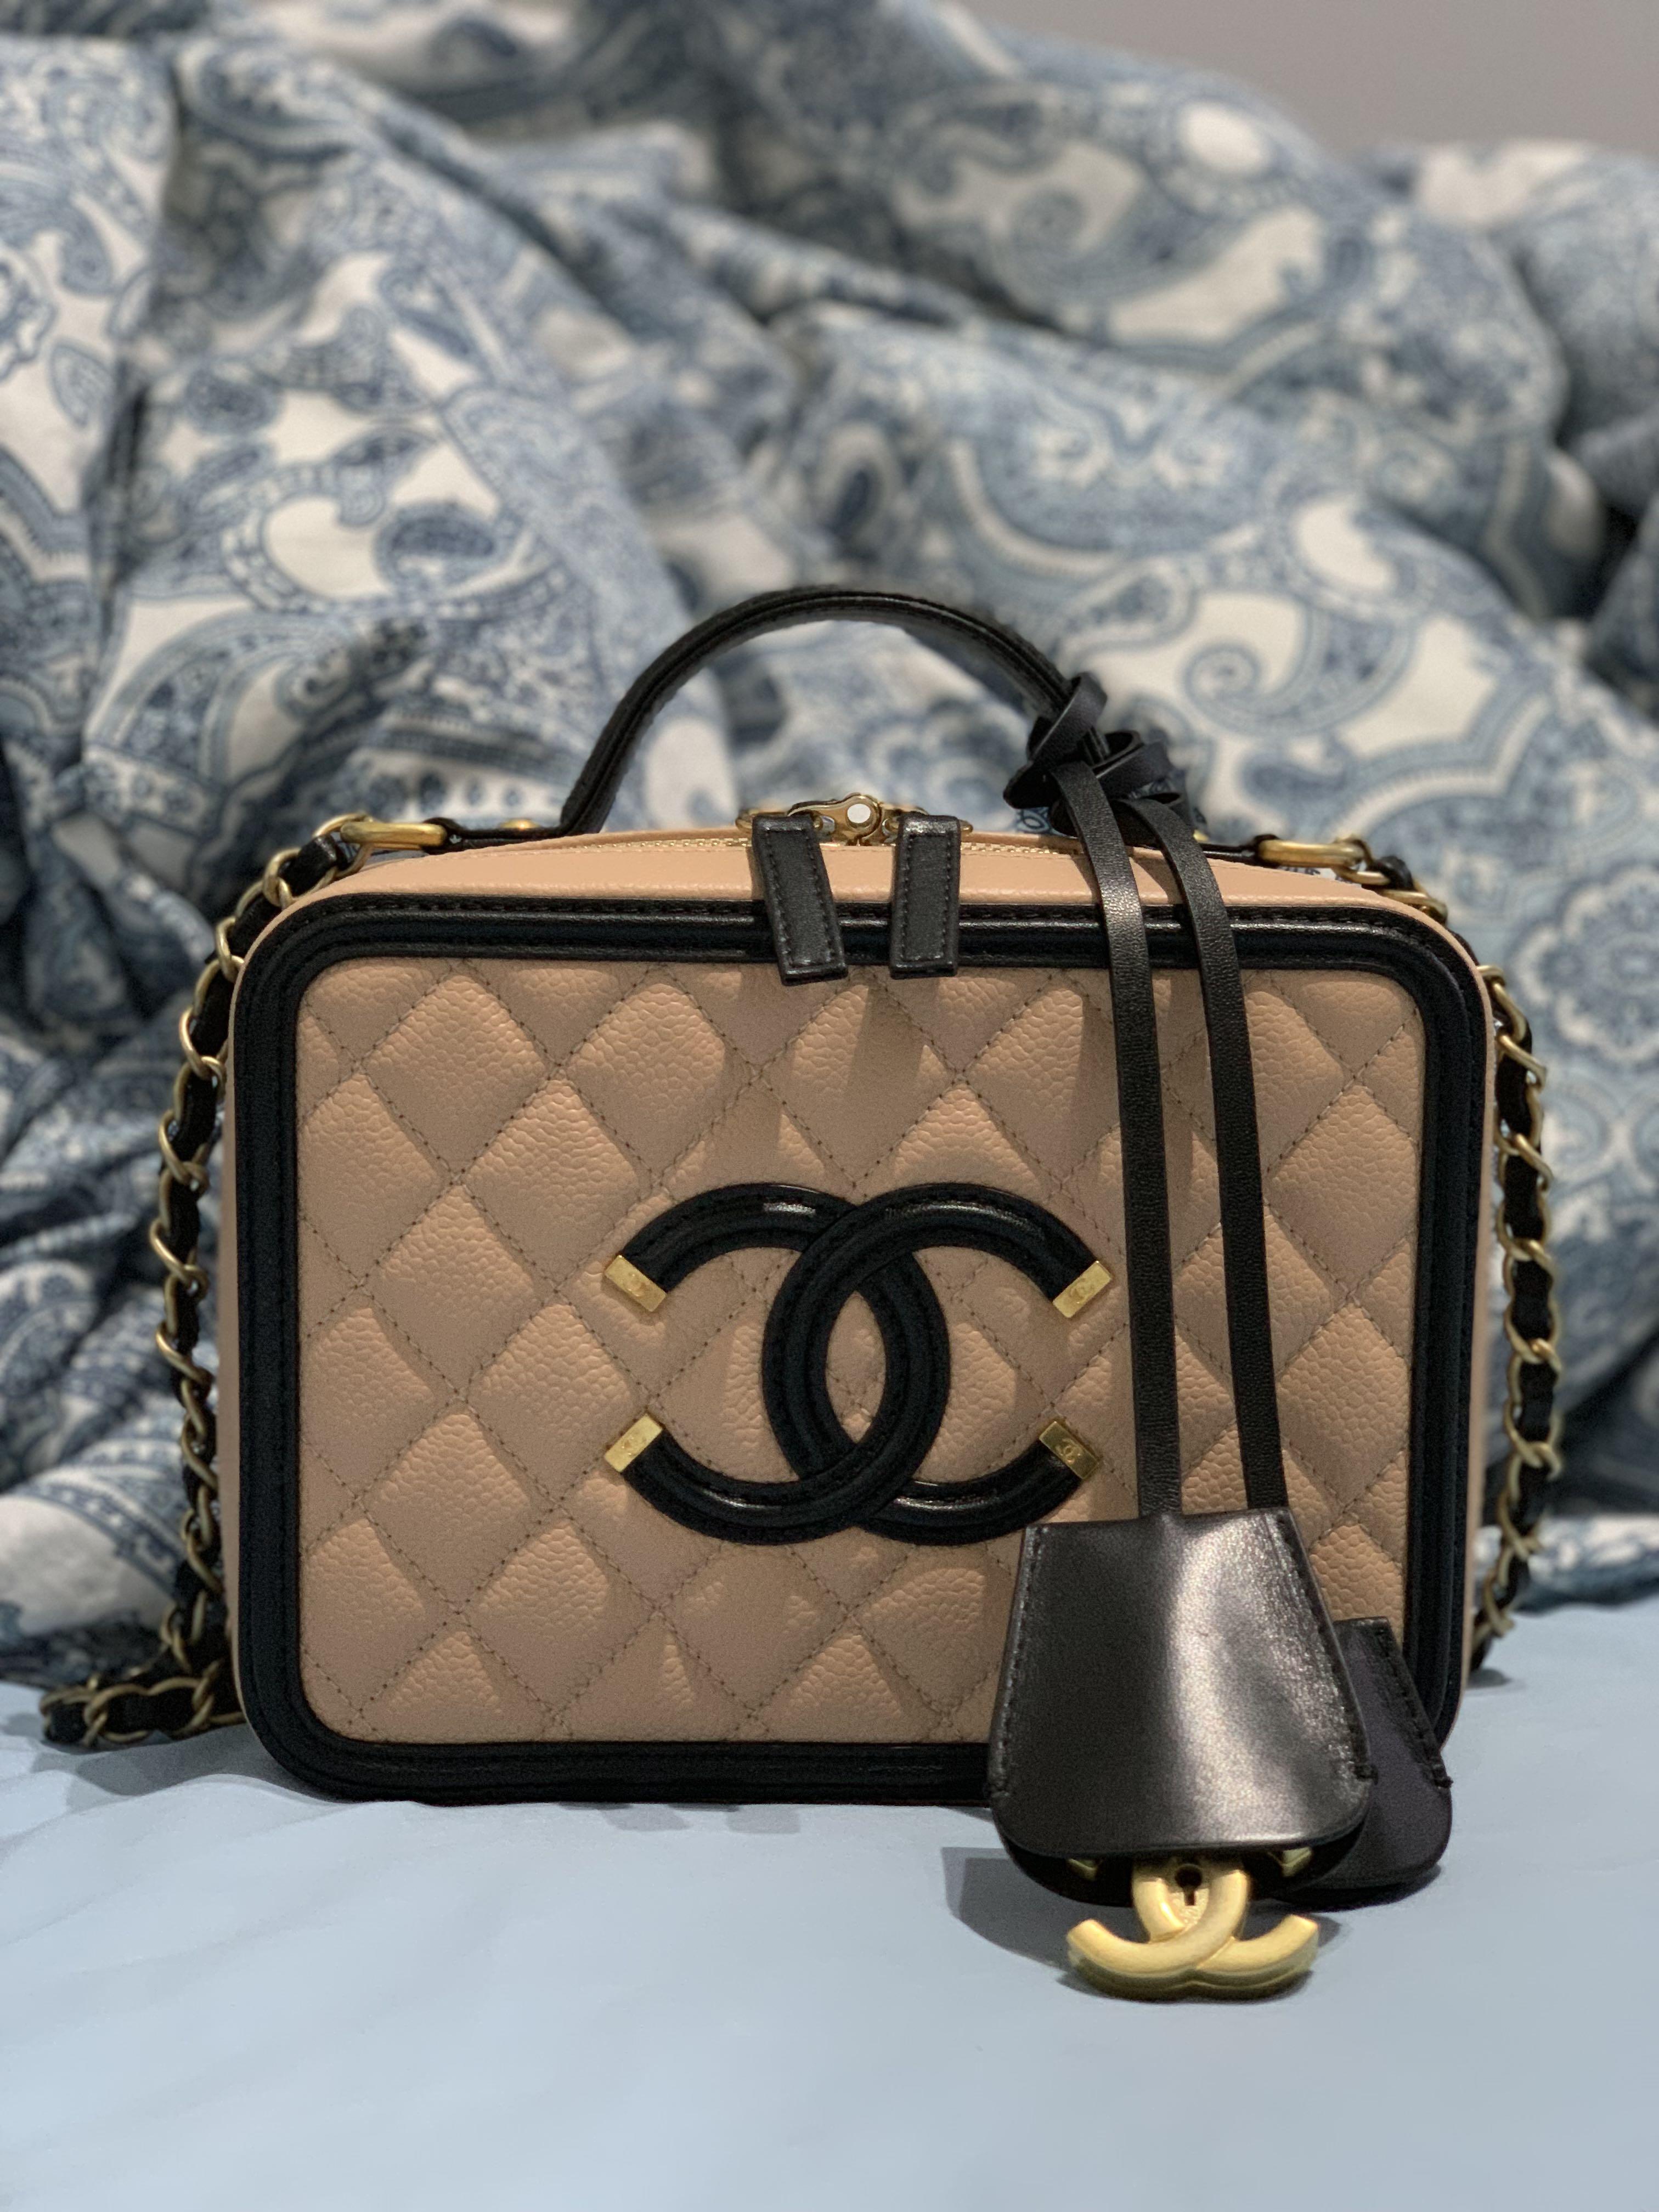 CHANEL VANITY CASE COMPARISON AND WHAT FITS  SMALL VS MEDIUM  YouTube